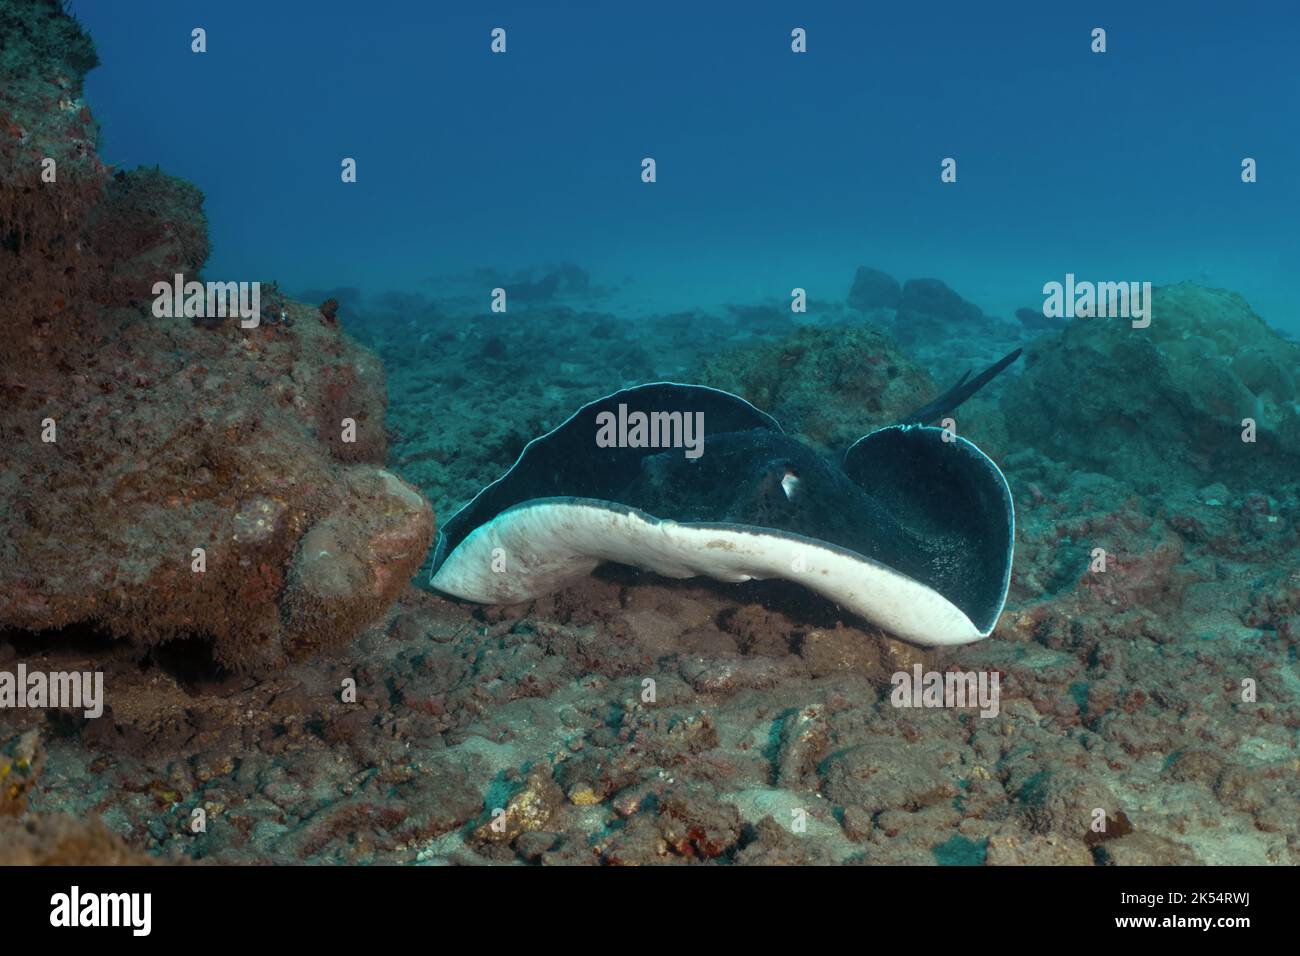 A Marbled stingray (Taeniura meyeni) is resting on the sand near the rocky outcrops of a coral reef in the Indian Ocean surrounding Mauritius. Stock Photo